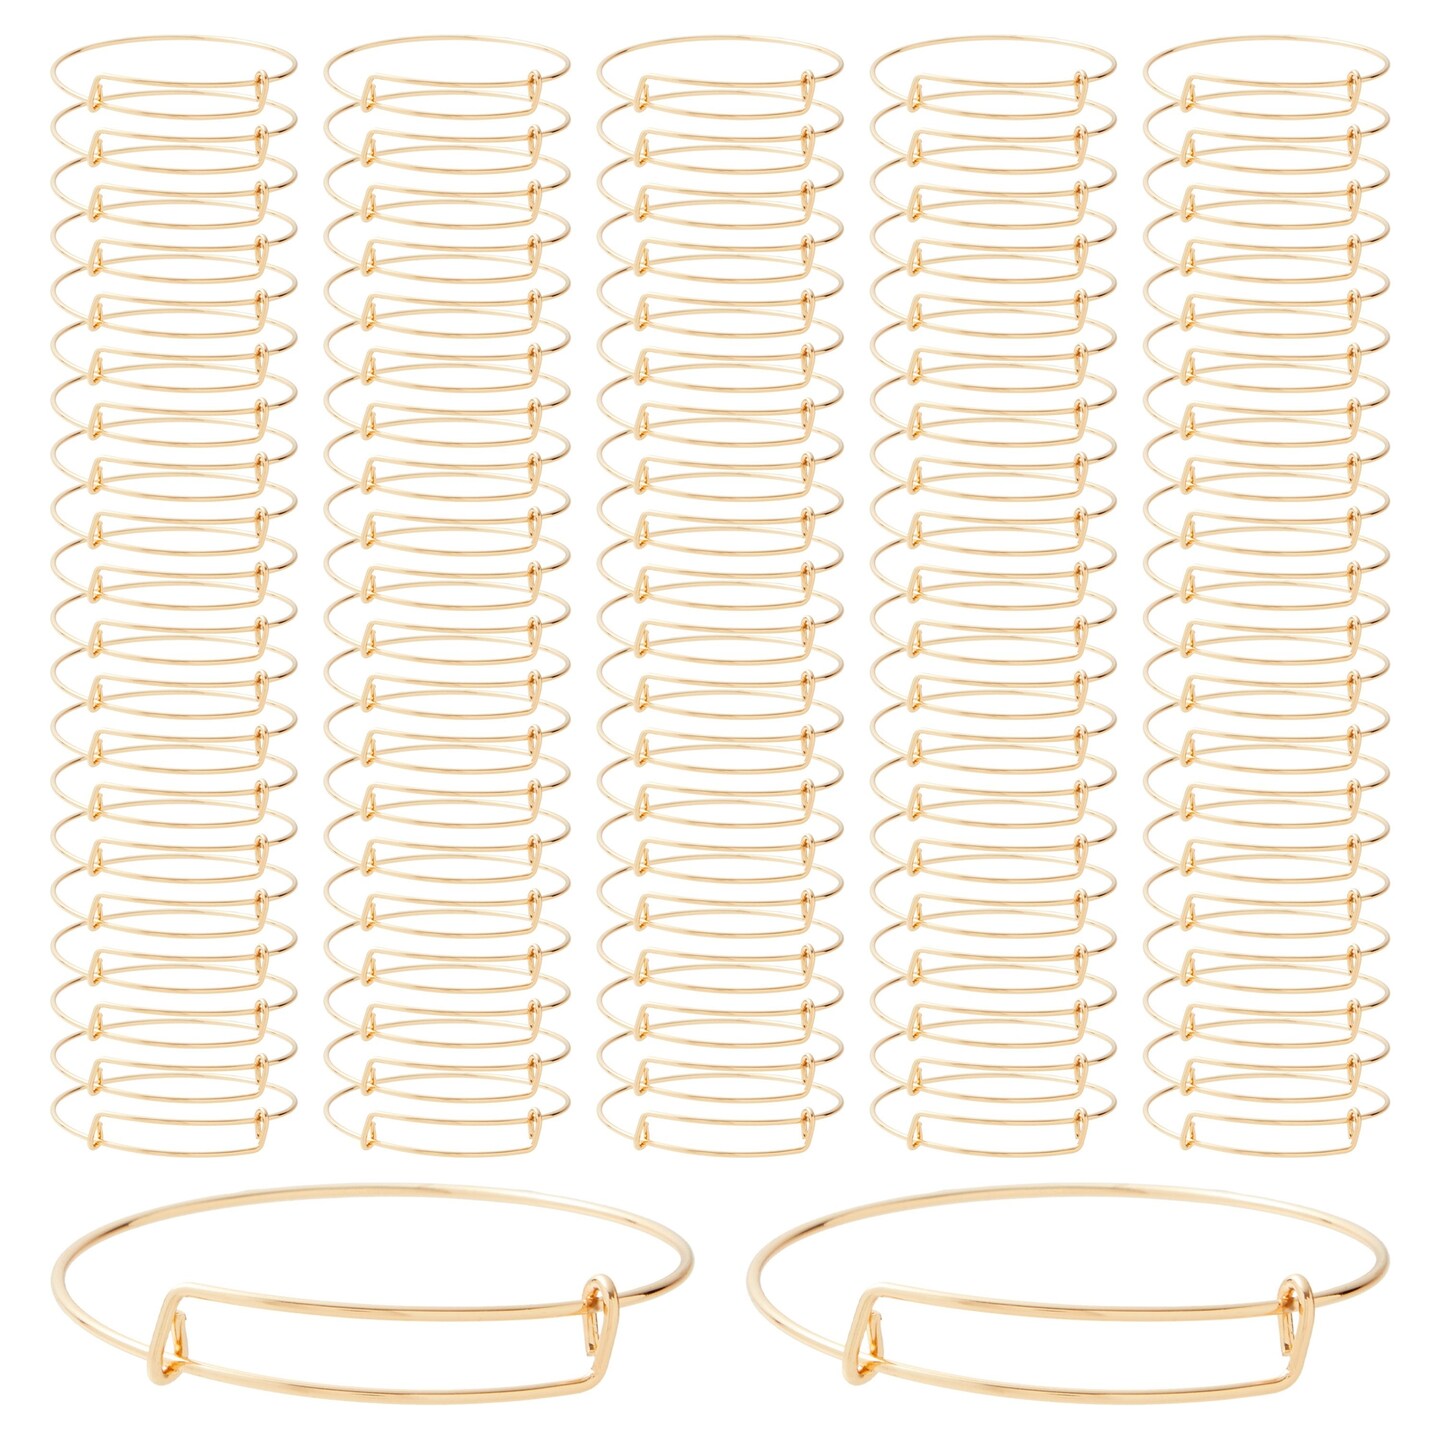 100 Pack Expandable Bangle Bracelets for Jewelry Making, Blank Memory Wire  Cuffs for Women, Wholesale, DIY Crafts (Gold)